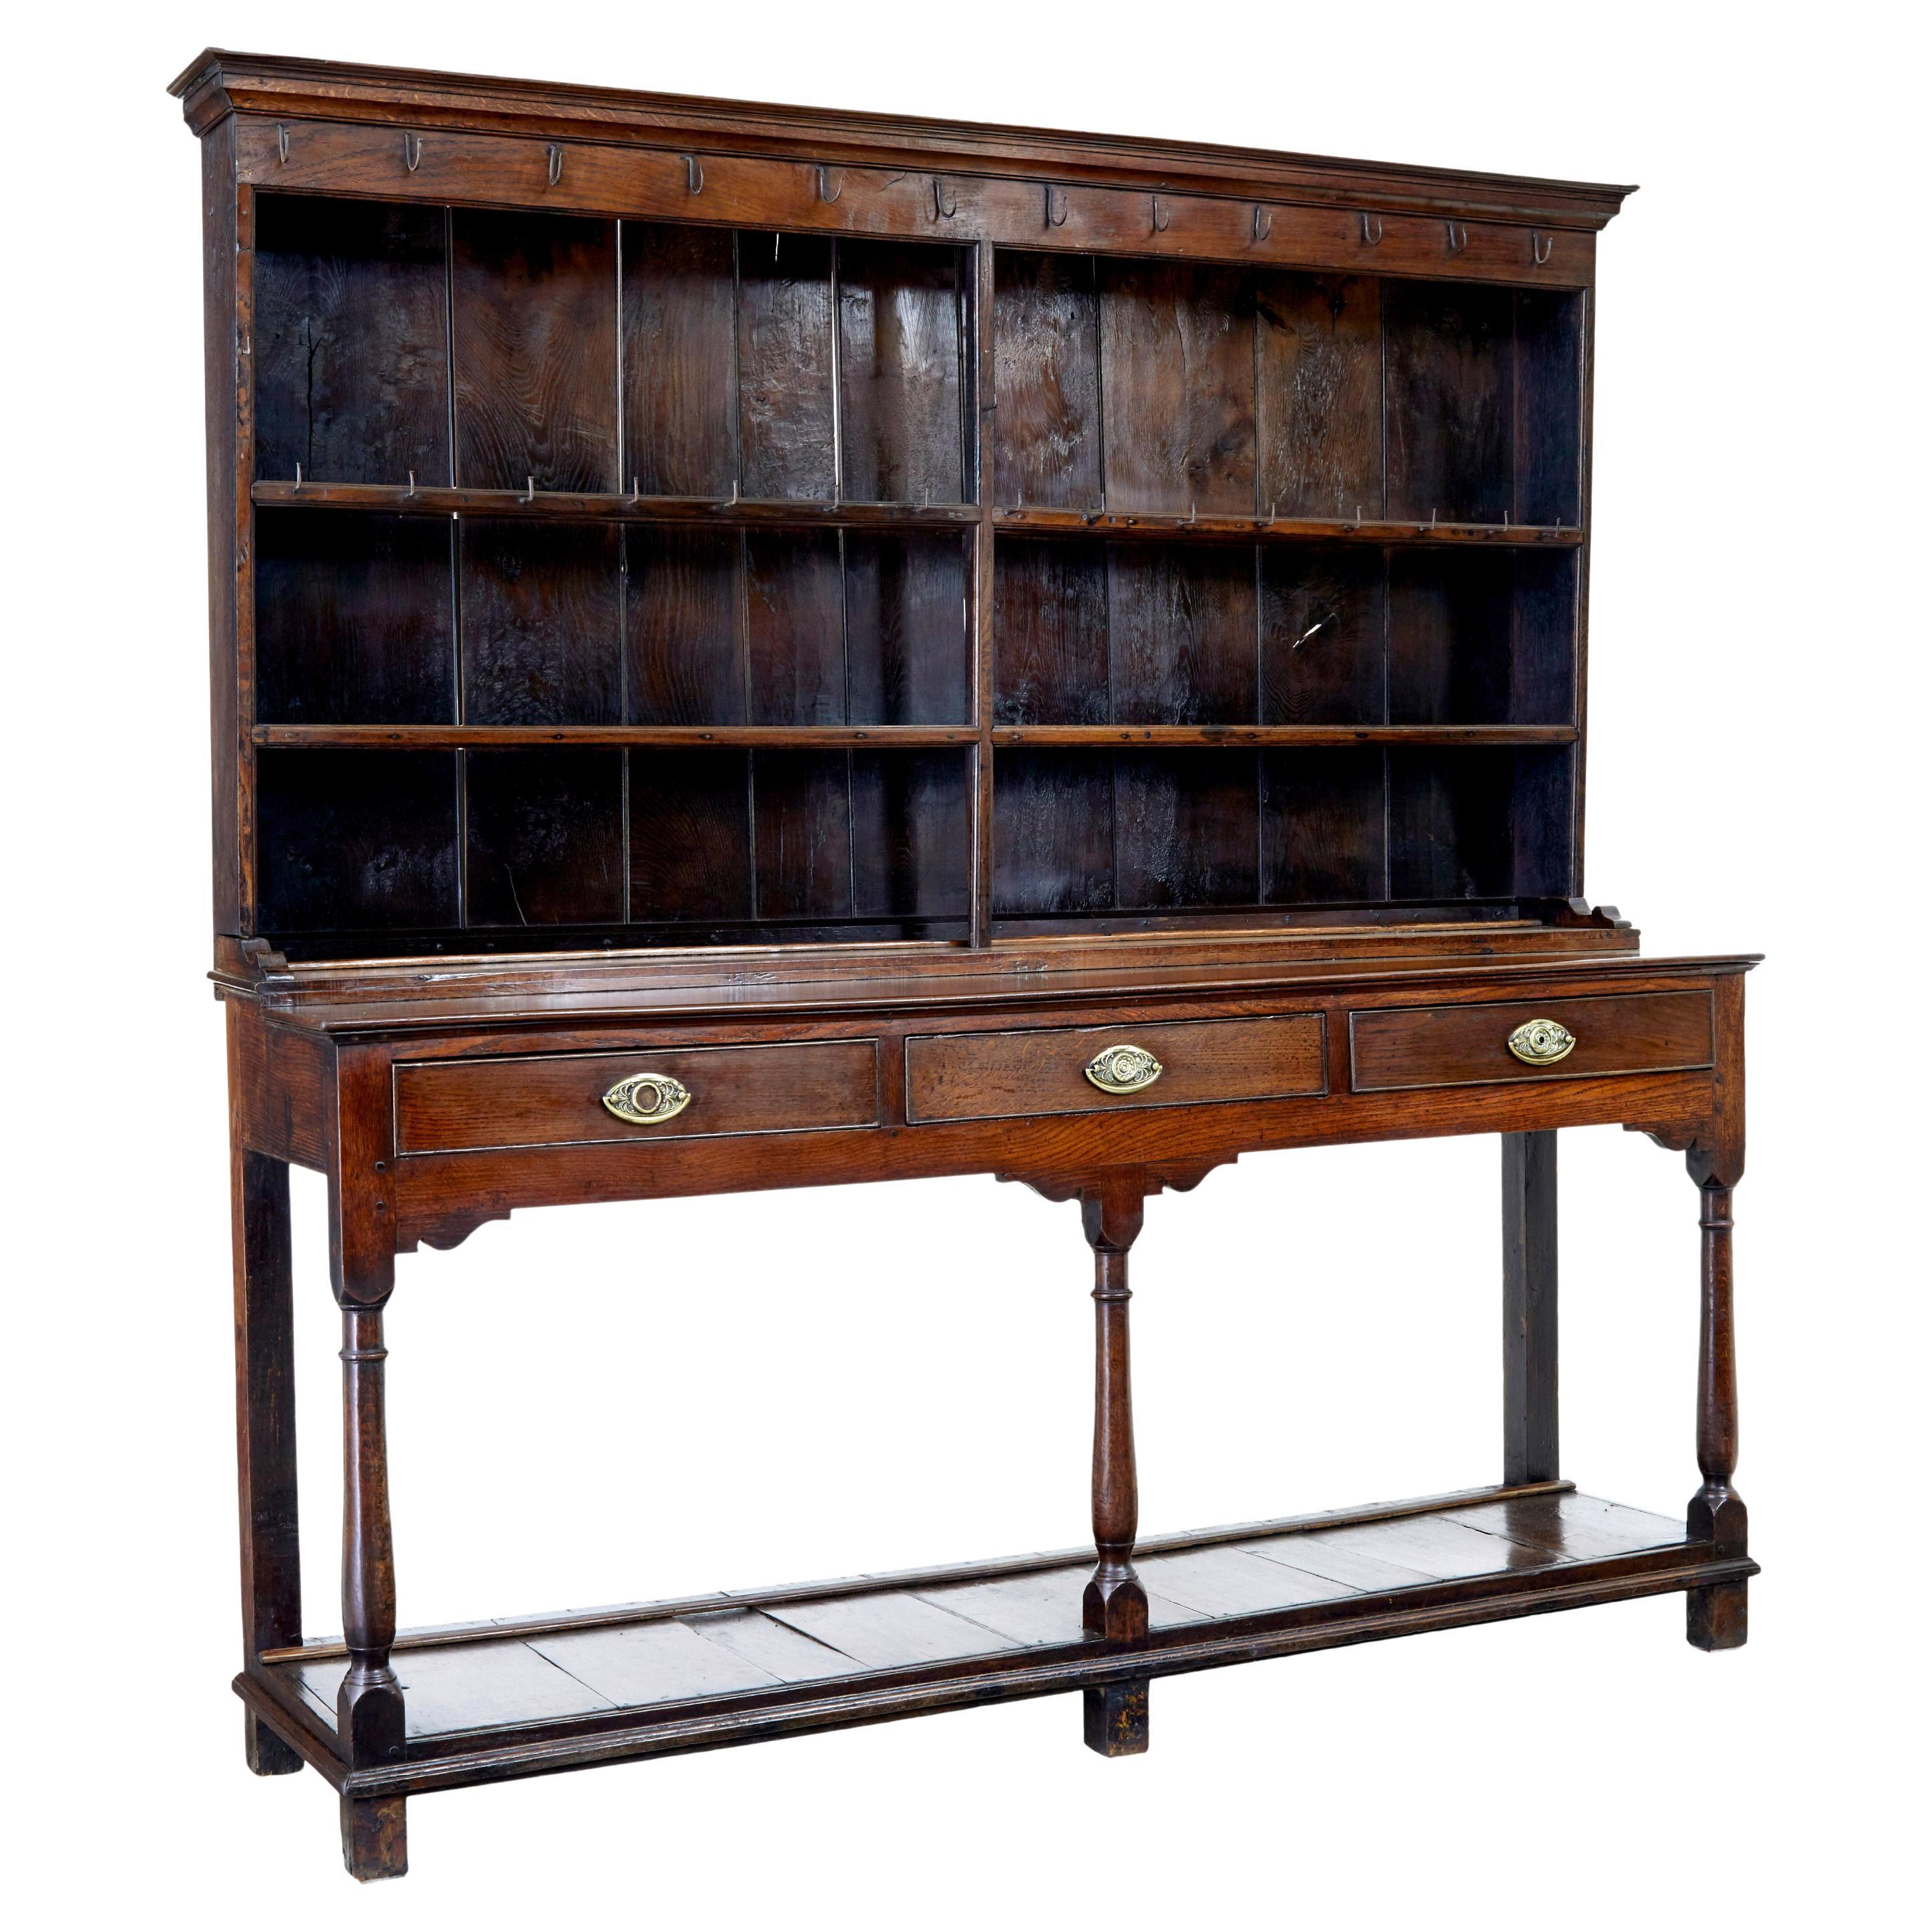 Early 19th century Welsh oak dresser and rack